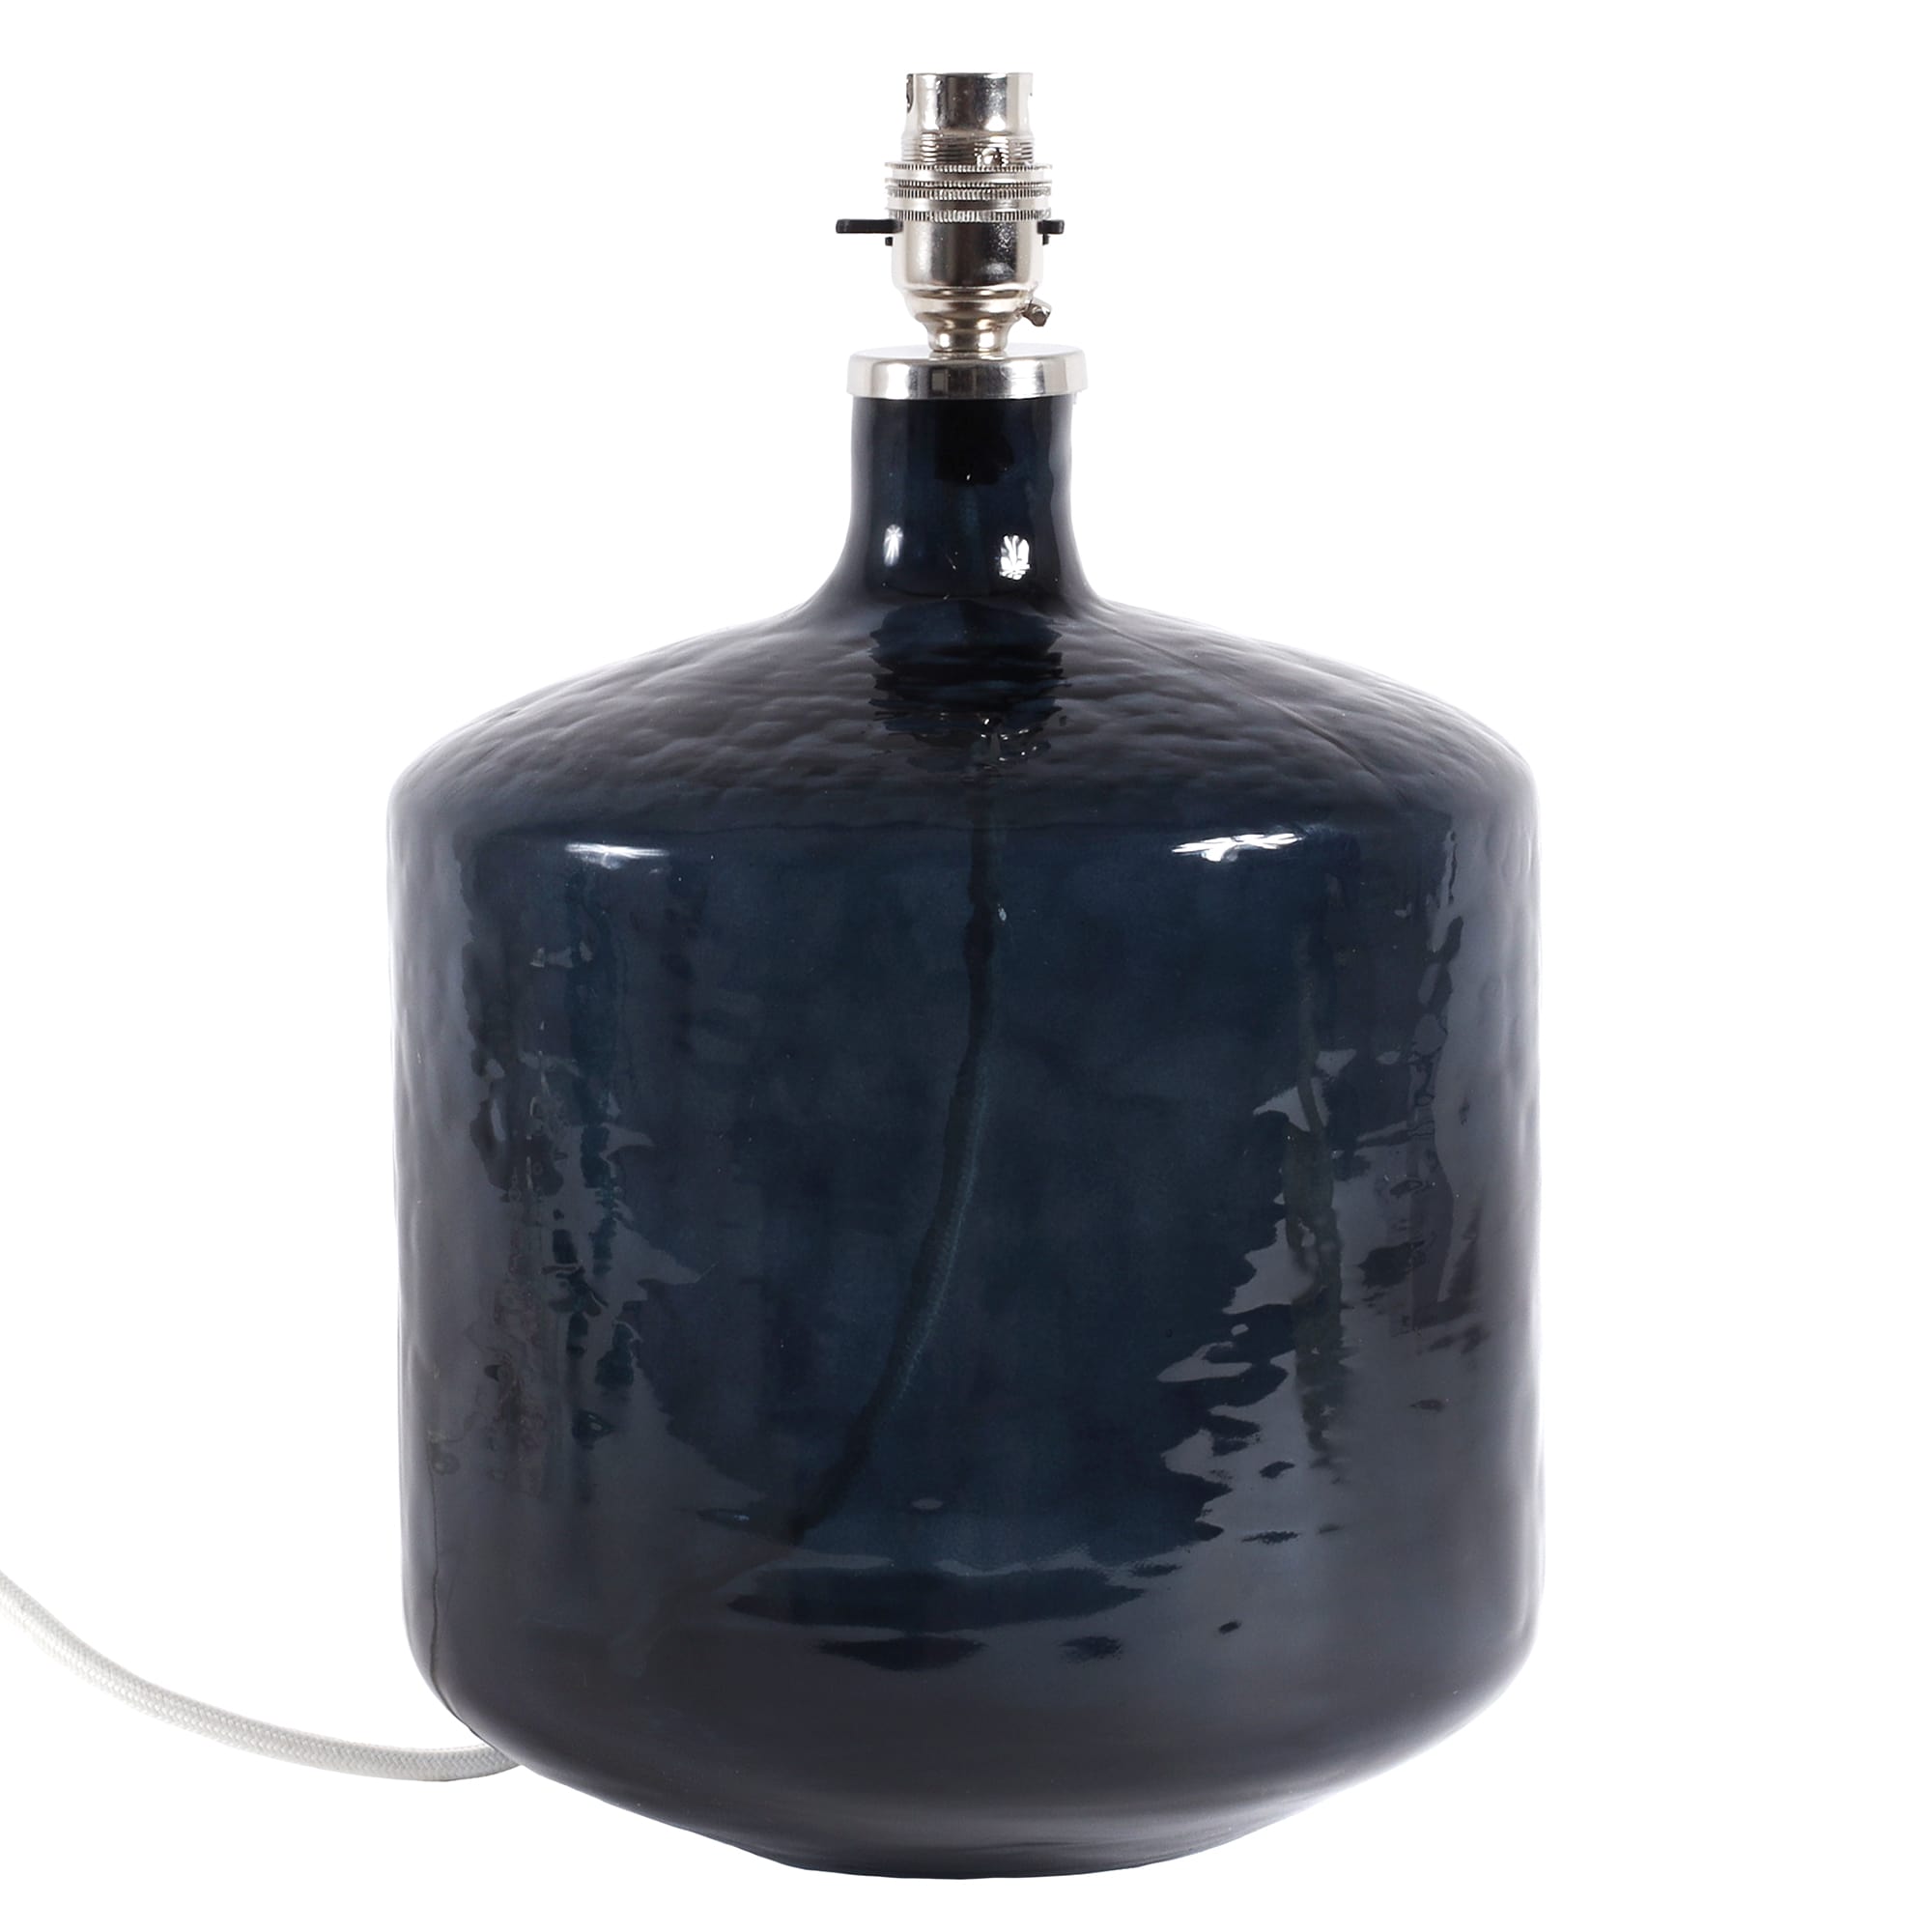 Petrol Blue Glass lampbase with silver fixtures and a white electric cord